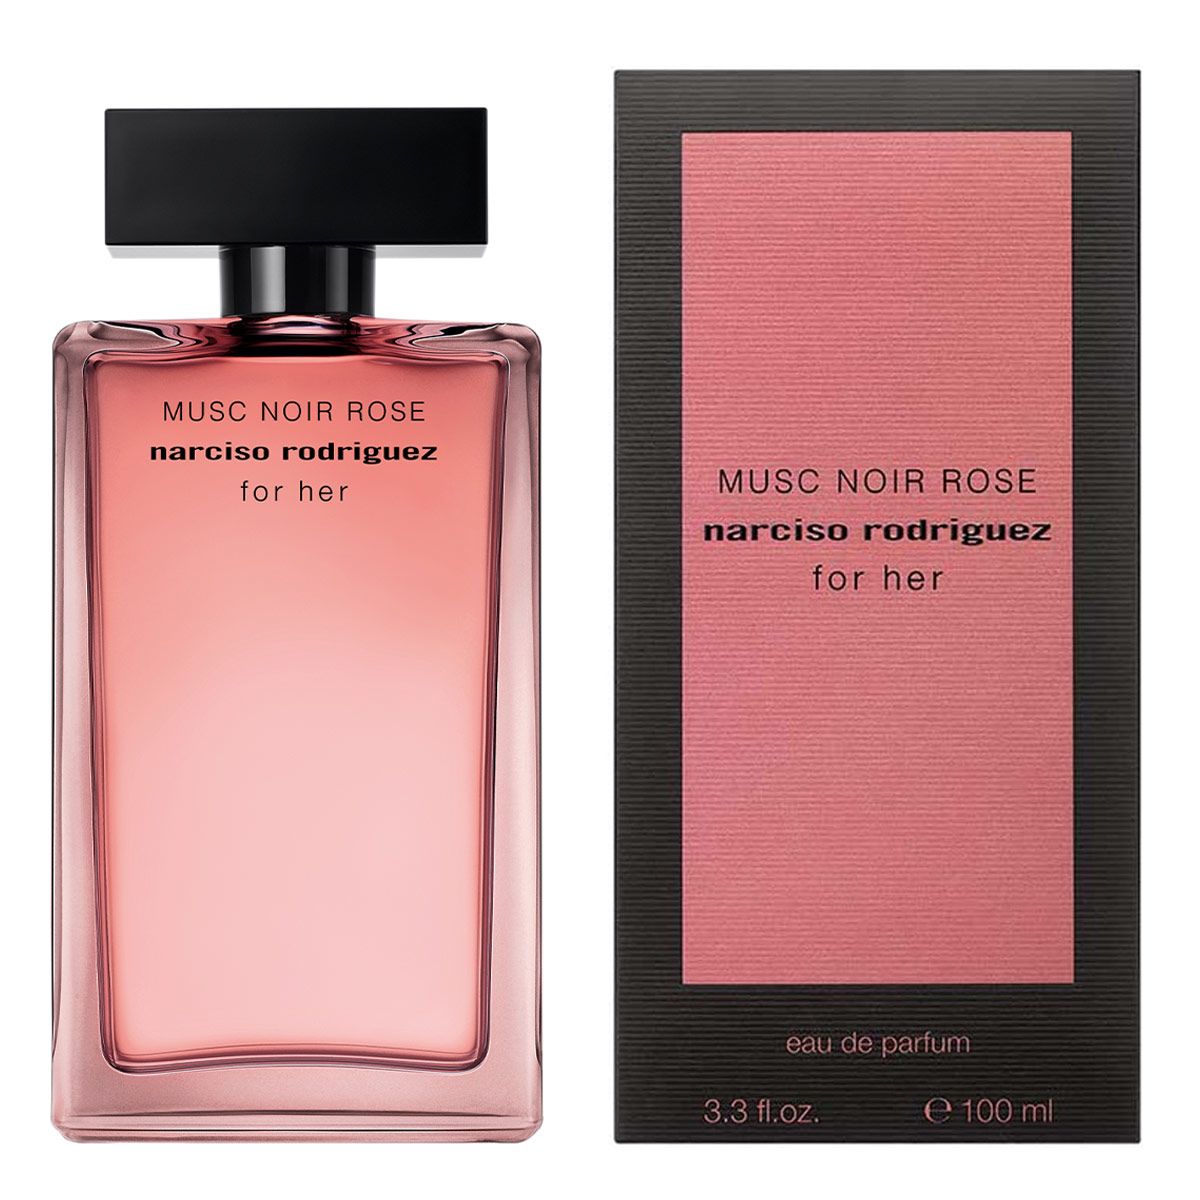  Narciso Rodriguez Musc Noir Rose For Her 